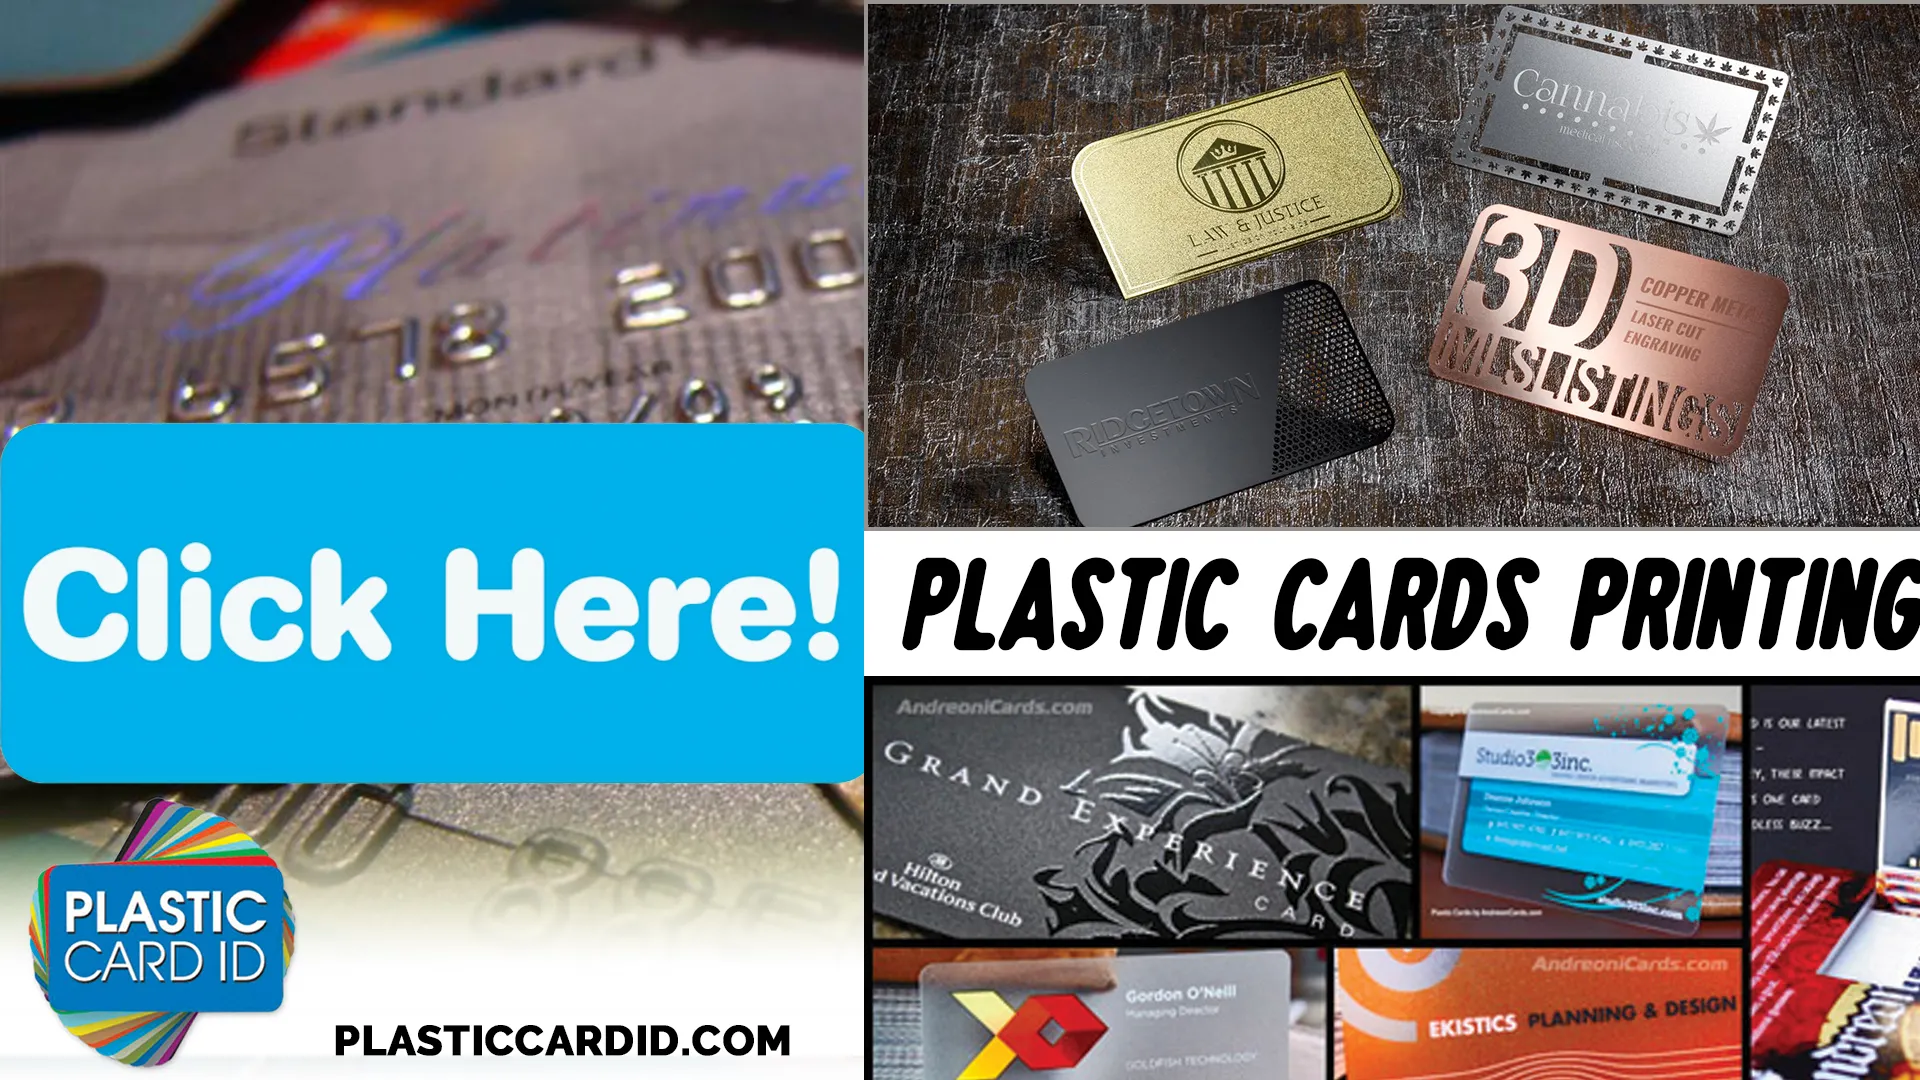 Breaking the Mold: Plastic Card ID
's Innovative Process